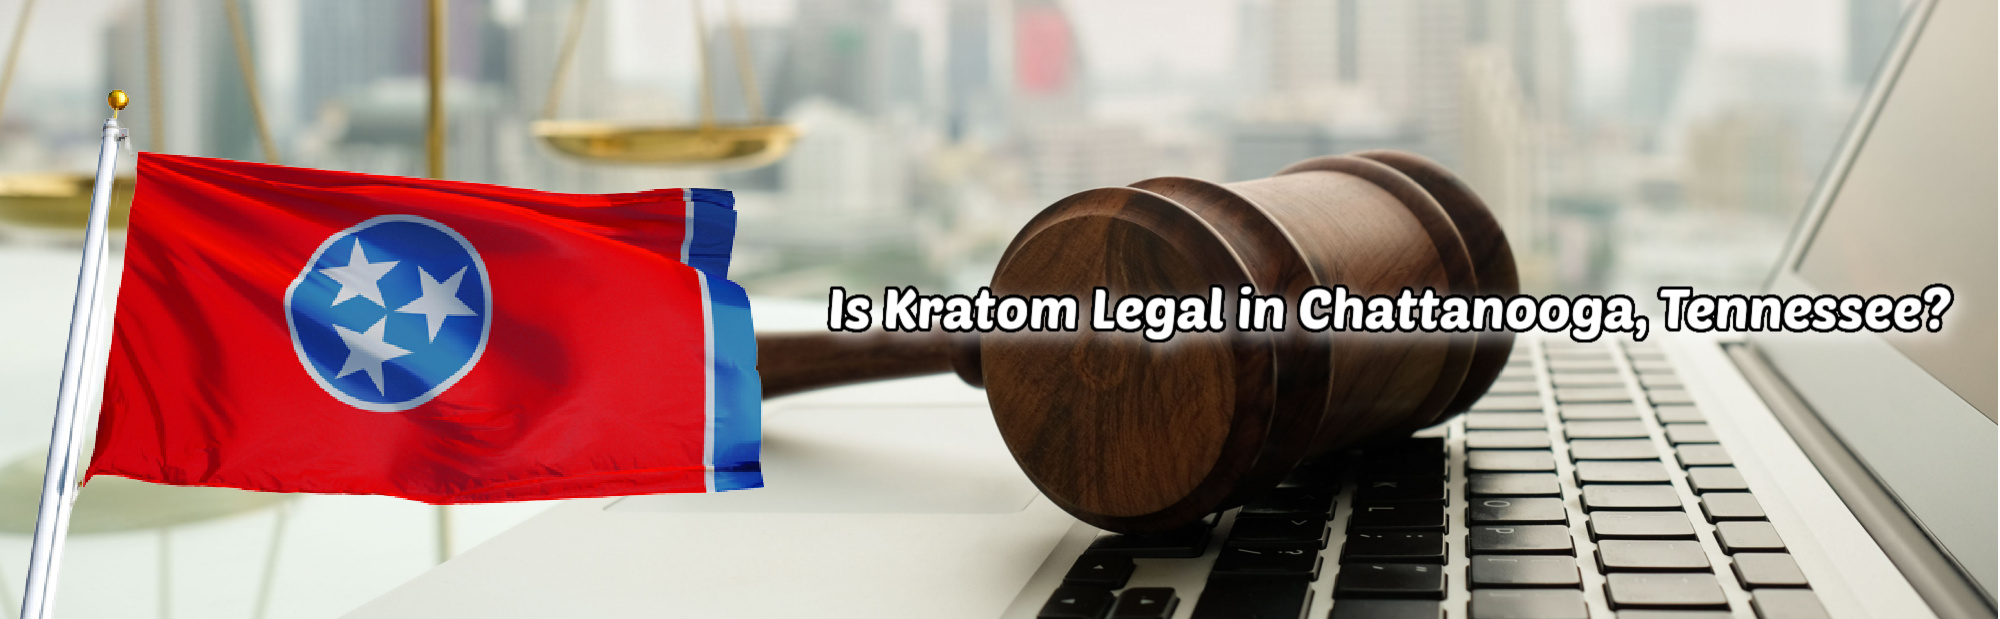 image of is kratom legal in chattanooga tn